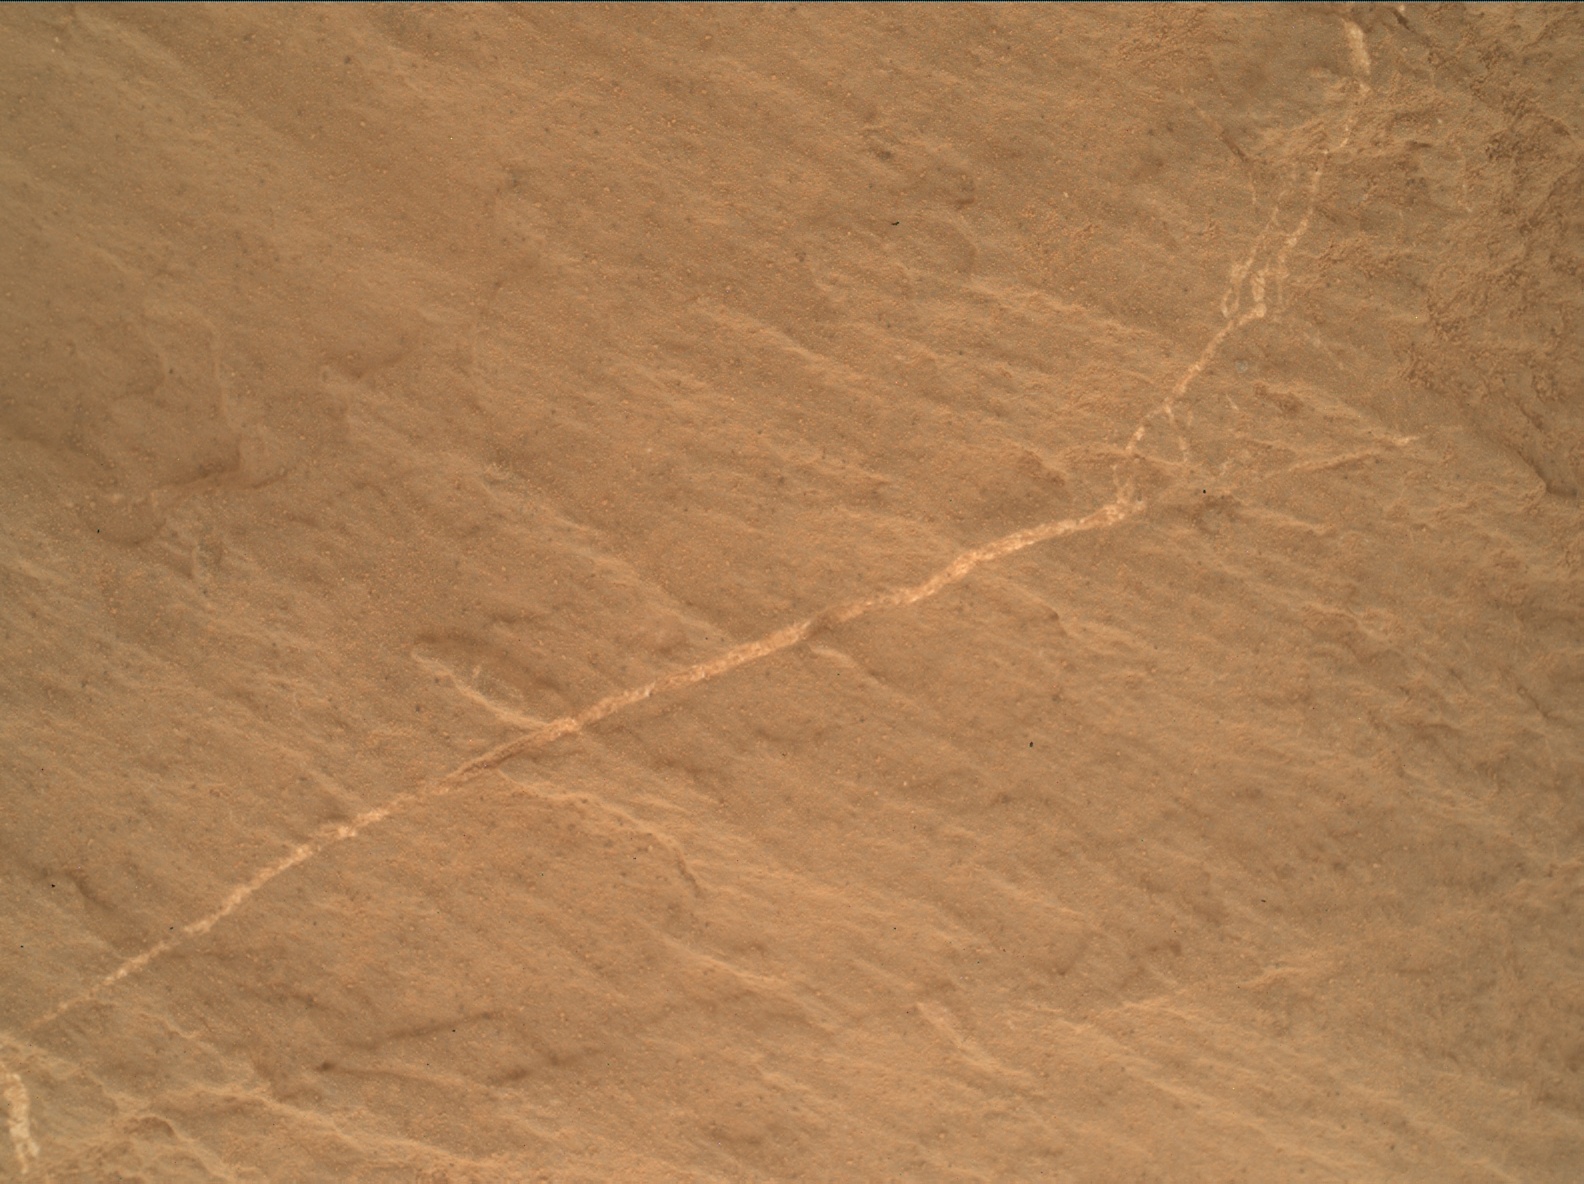 Nasa's Mars rover Curiosity acquired this image using its Mars Hand Lens Imager (MAHLI) on Sol 2616